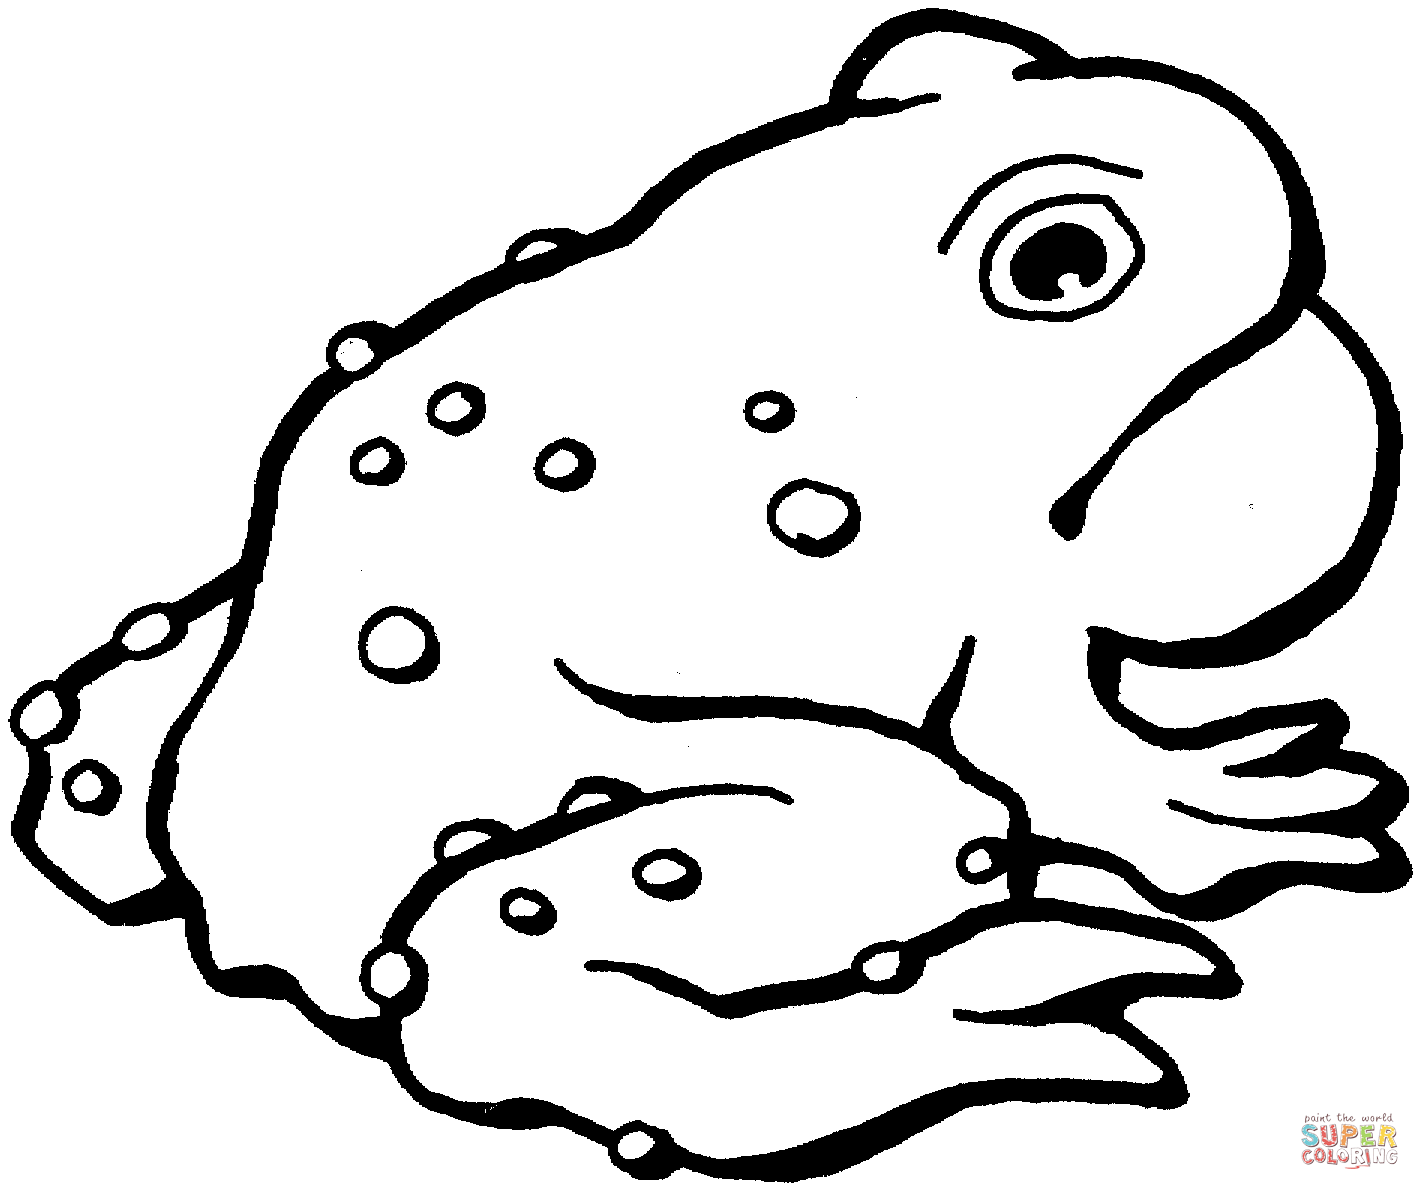 Toad clipart black and white.